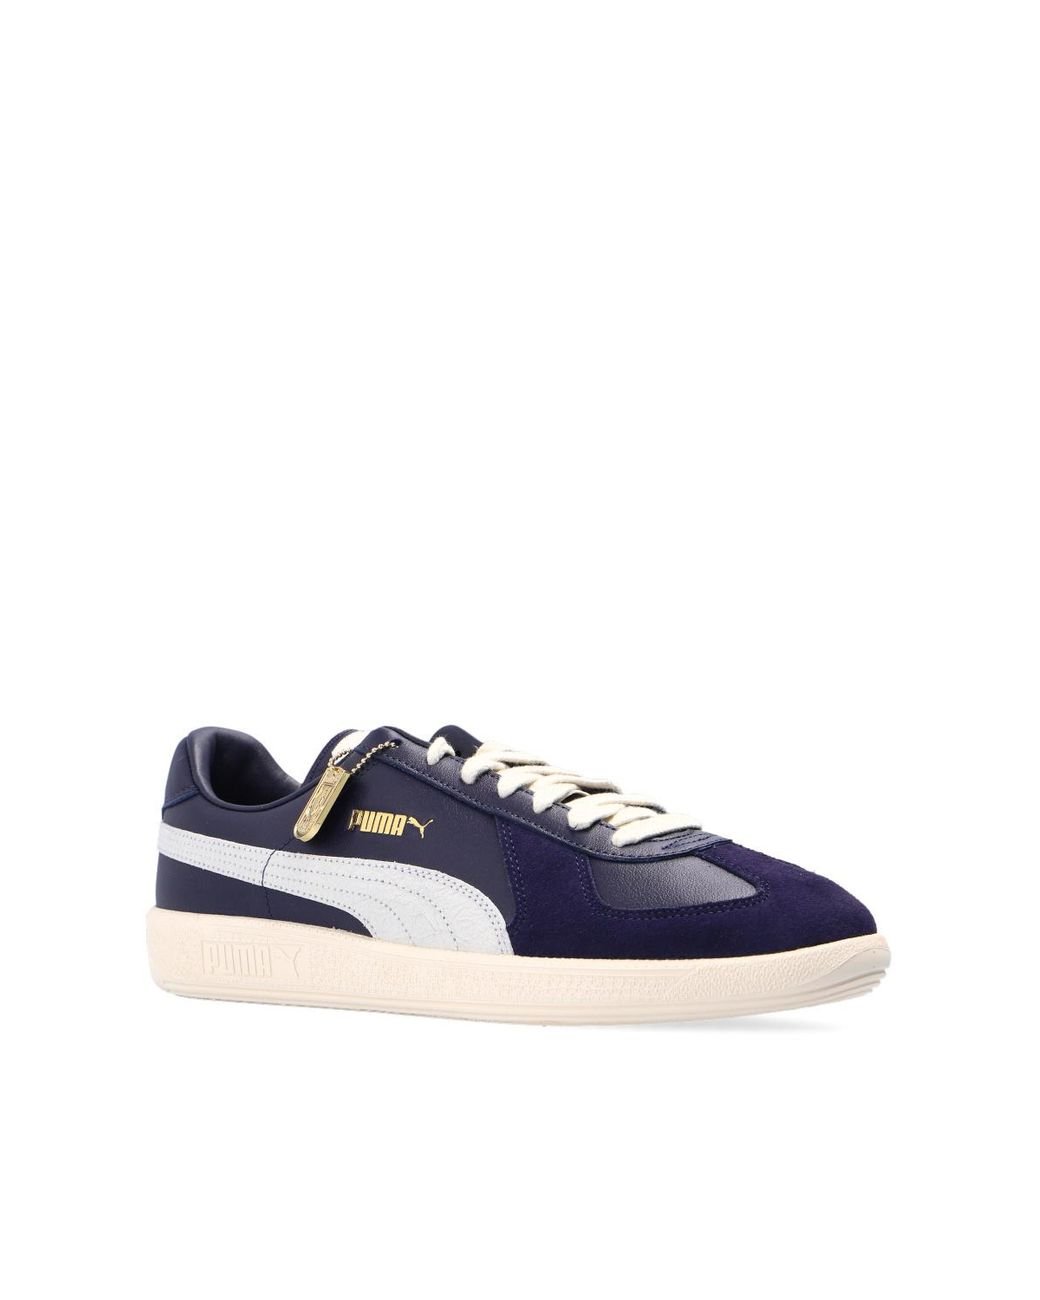 PUMA 'the Rudolf Dassler Legacy' Collection in Blue for Men | Lyst